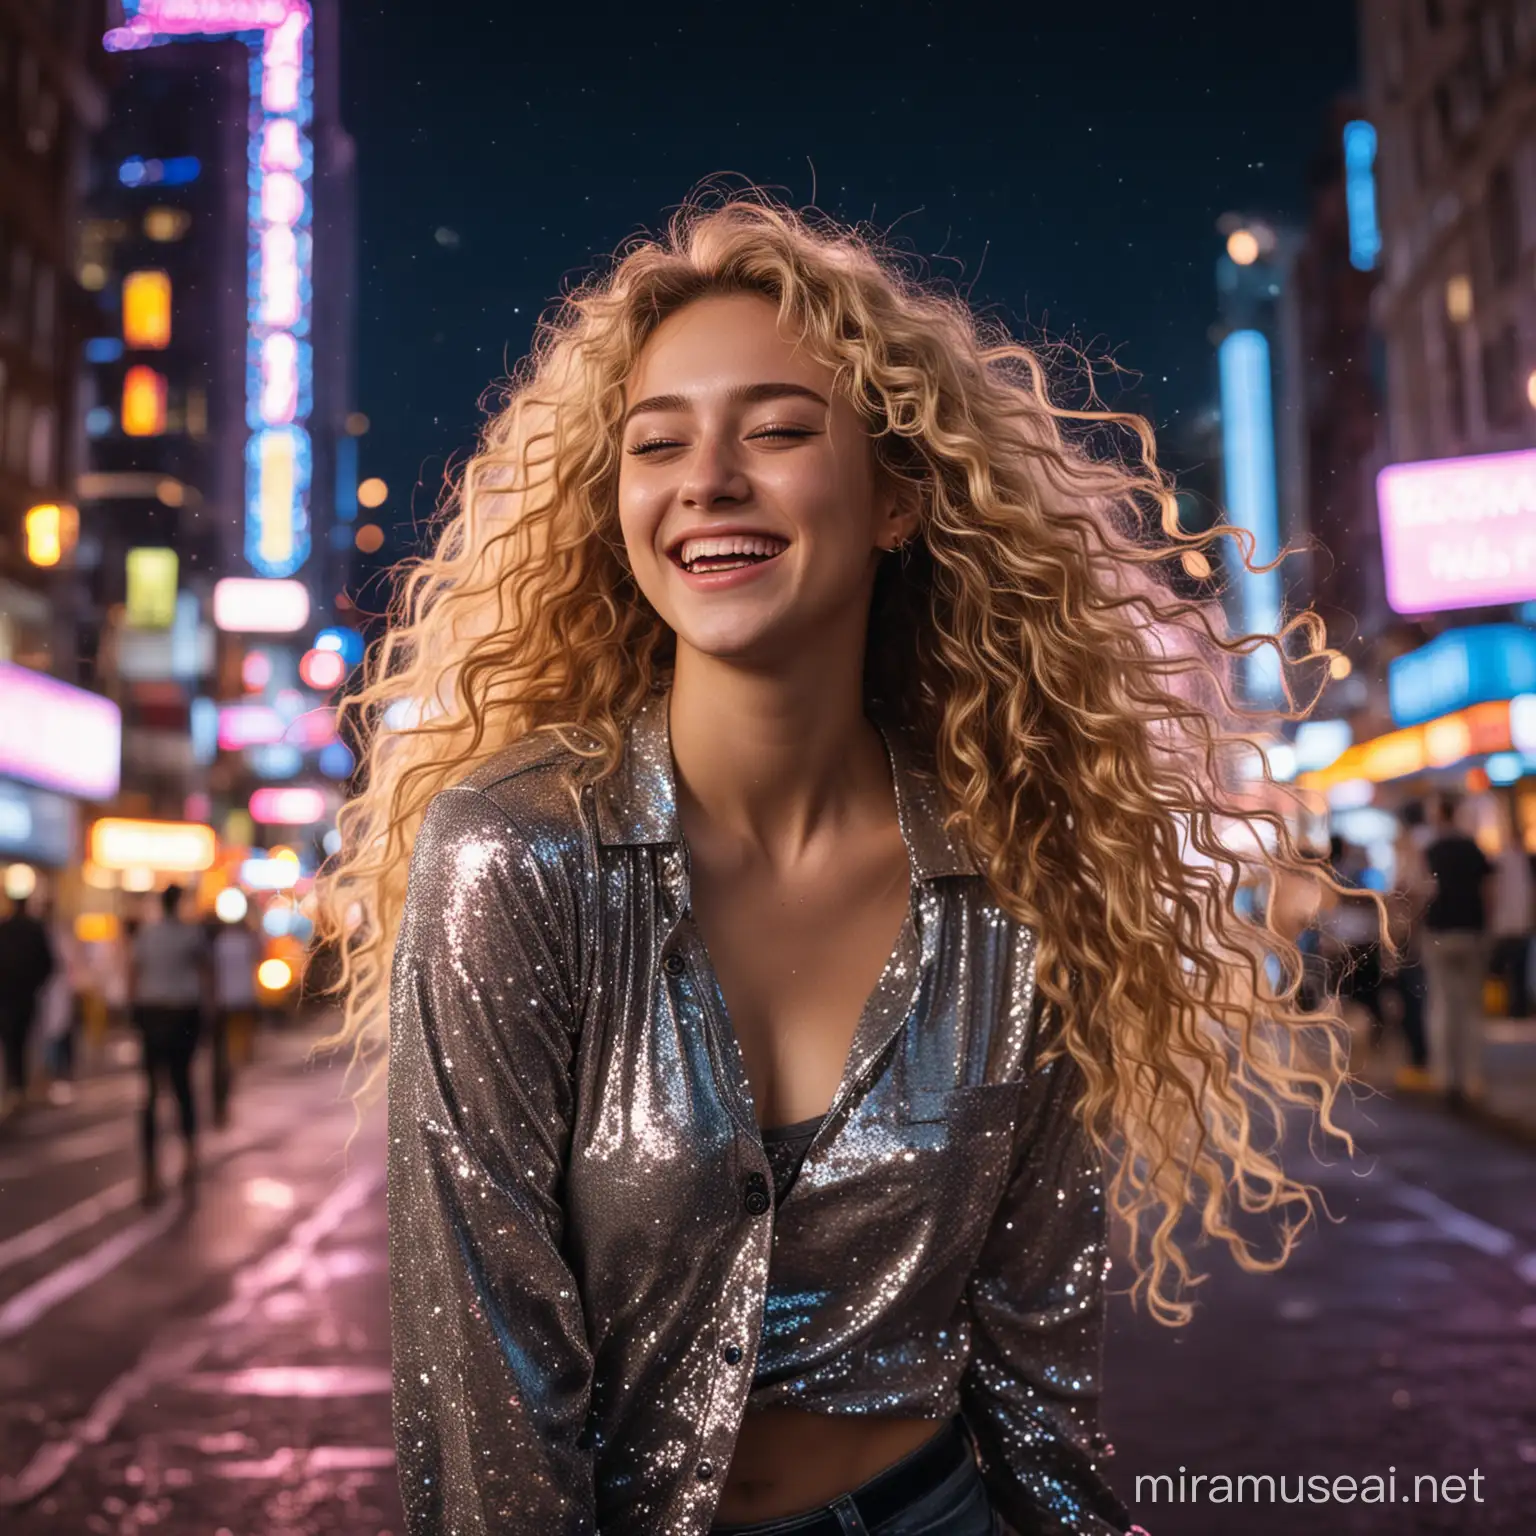 A full body image,high resolution, Sony a7 iiii, girl is crying with laughter, smiling wide, fancy shirt, glitter on face and arms, long blonde curly hair, moonlight shining from the right side, background showing a busy city, neon lights